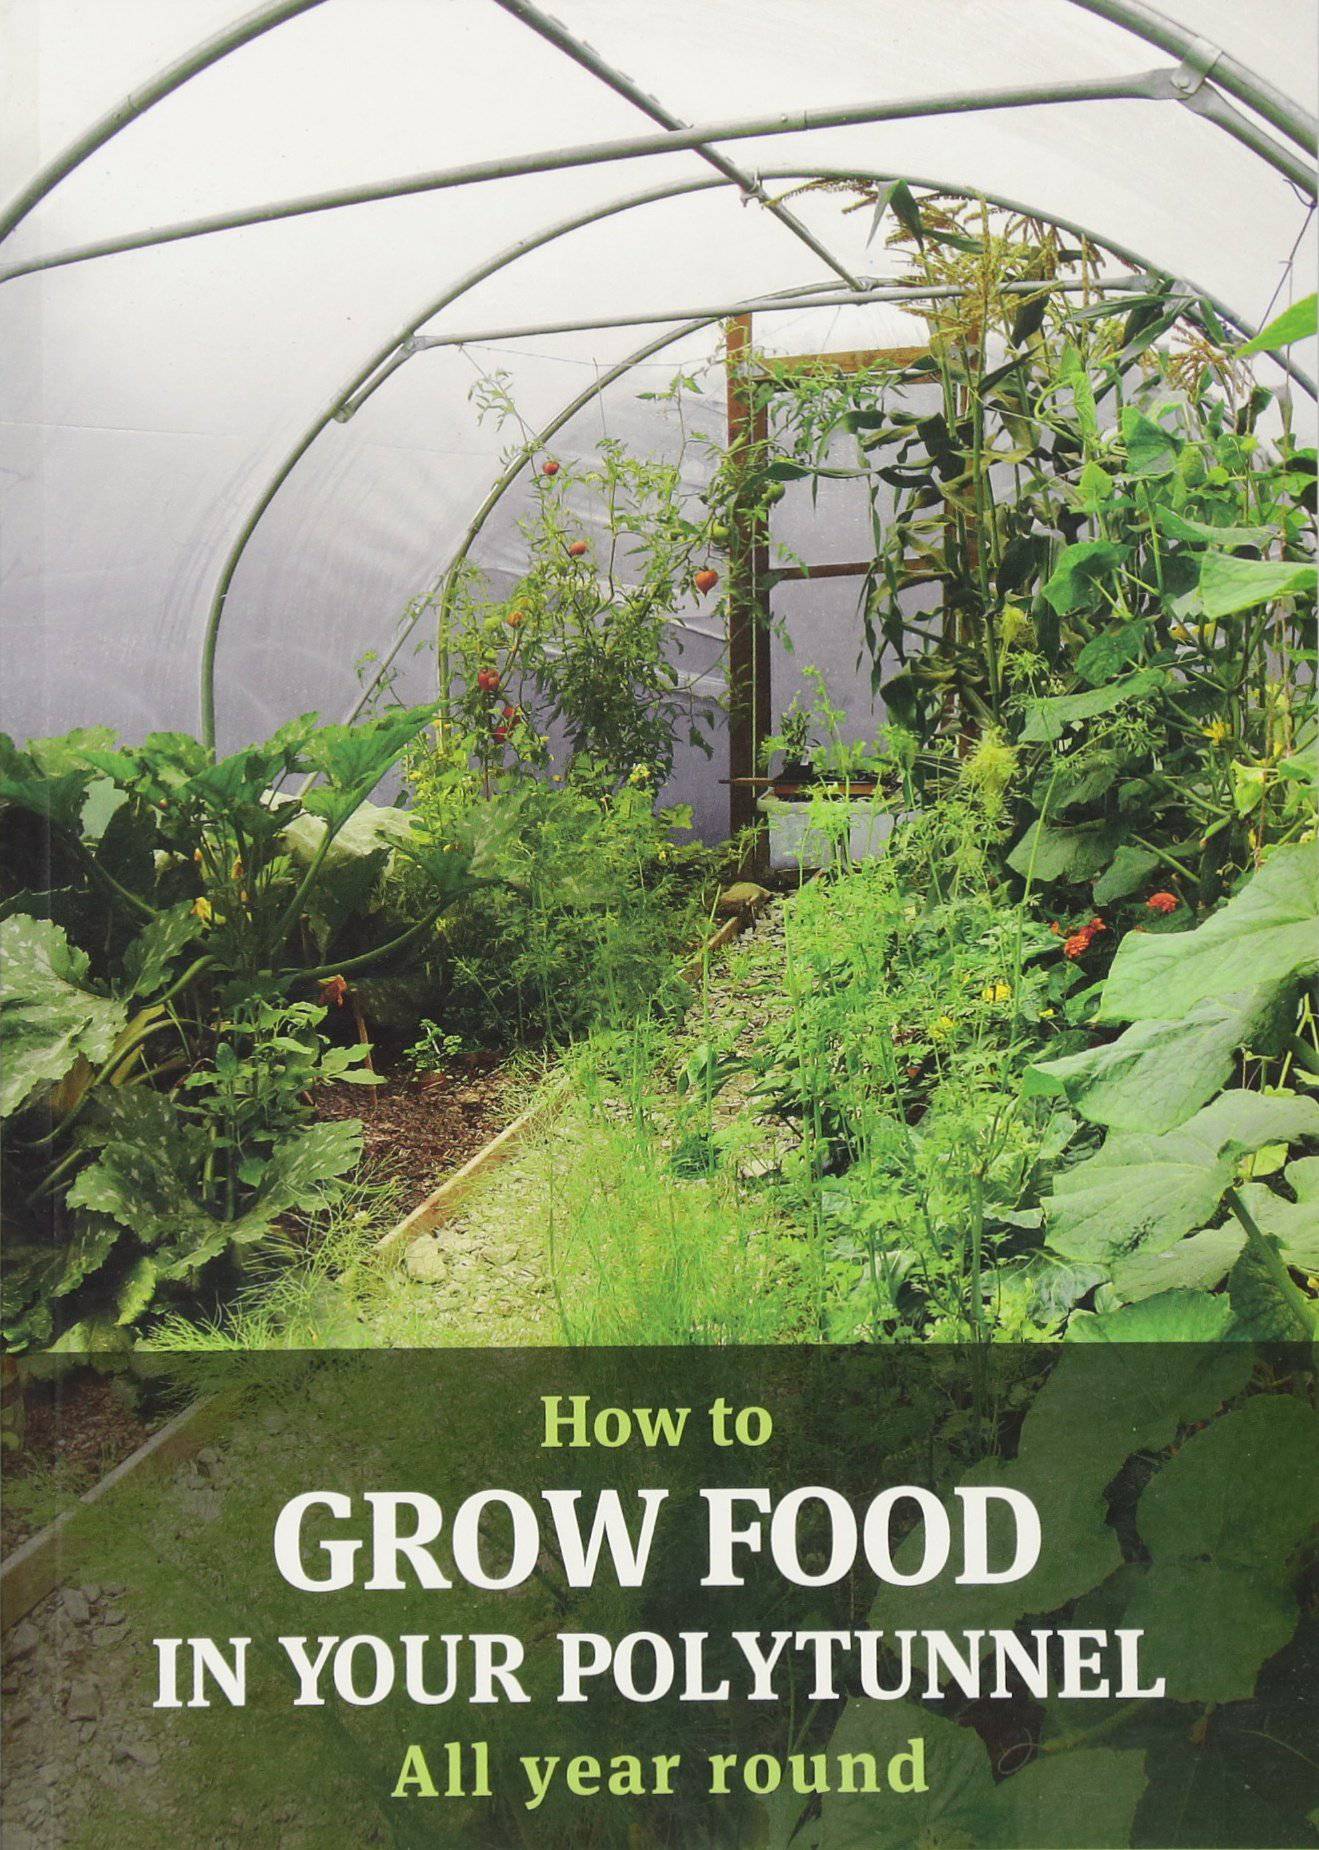 How to grow food in your polytunnel all year round by Mark Gatter & Andy McKee